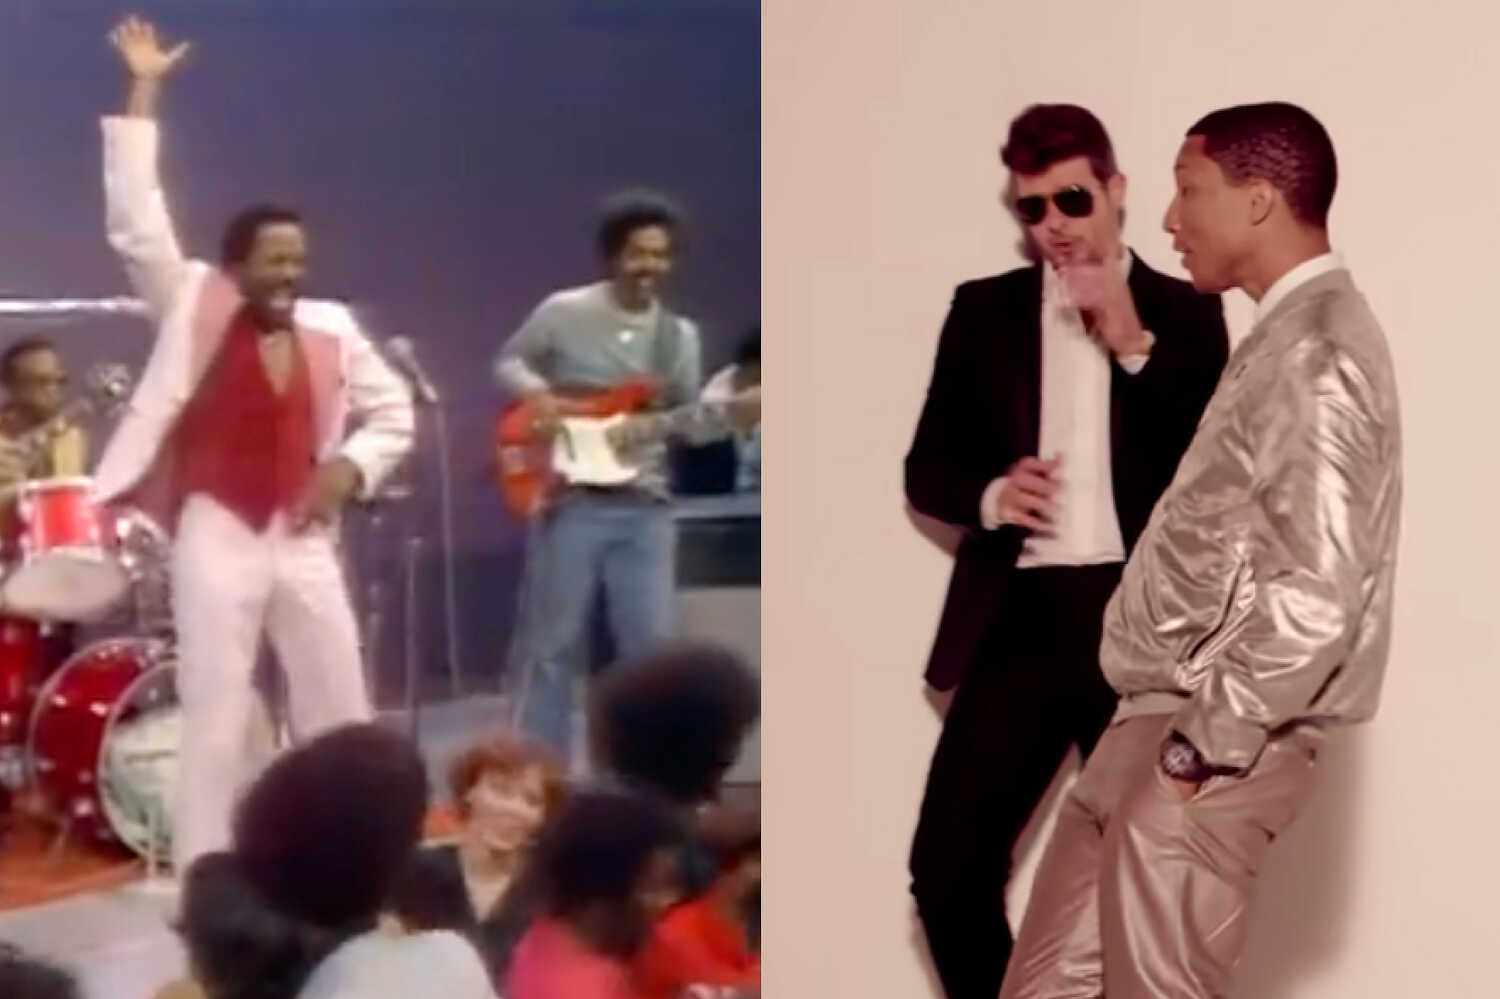 The family of the soul star Marvin Gaye (left) sued Robin Thicke and Pharrell Williams (right) over their song “Blurred Lines.” The case had a major impact on songwriting, and legal challenges to come.Credit...via YouTube